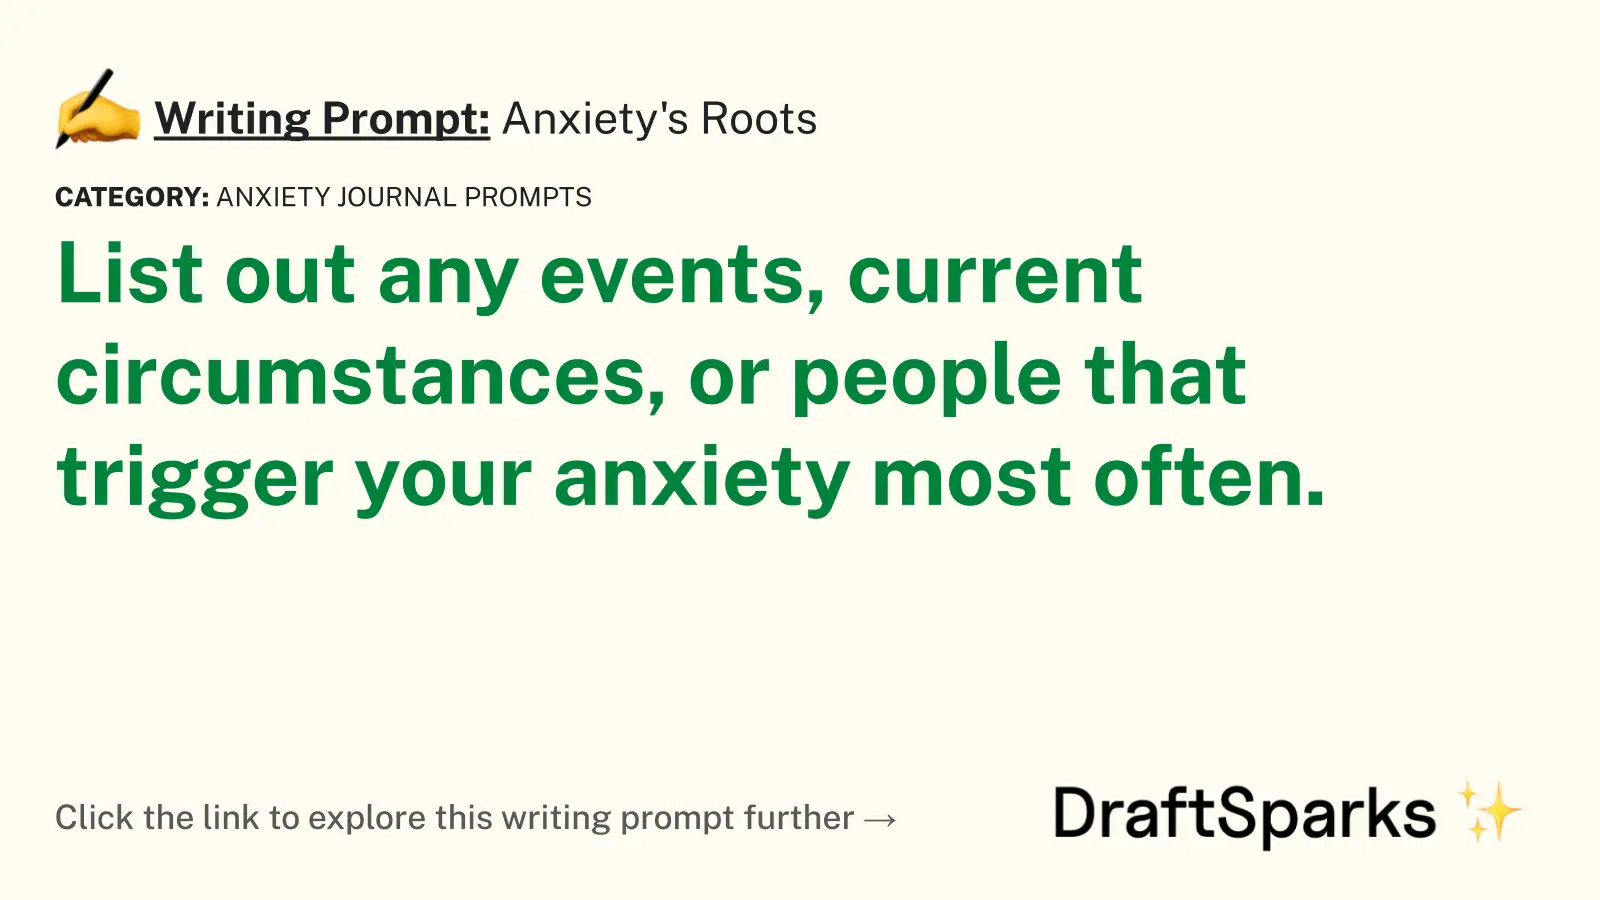 Anxiety’s Roots